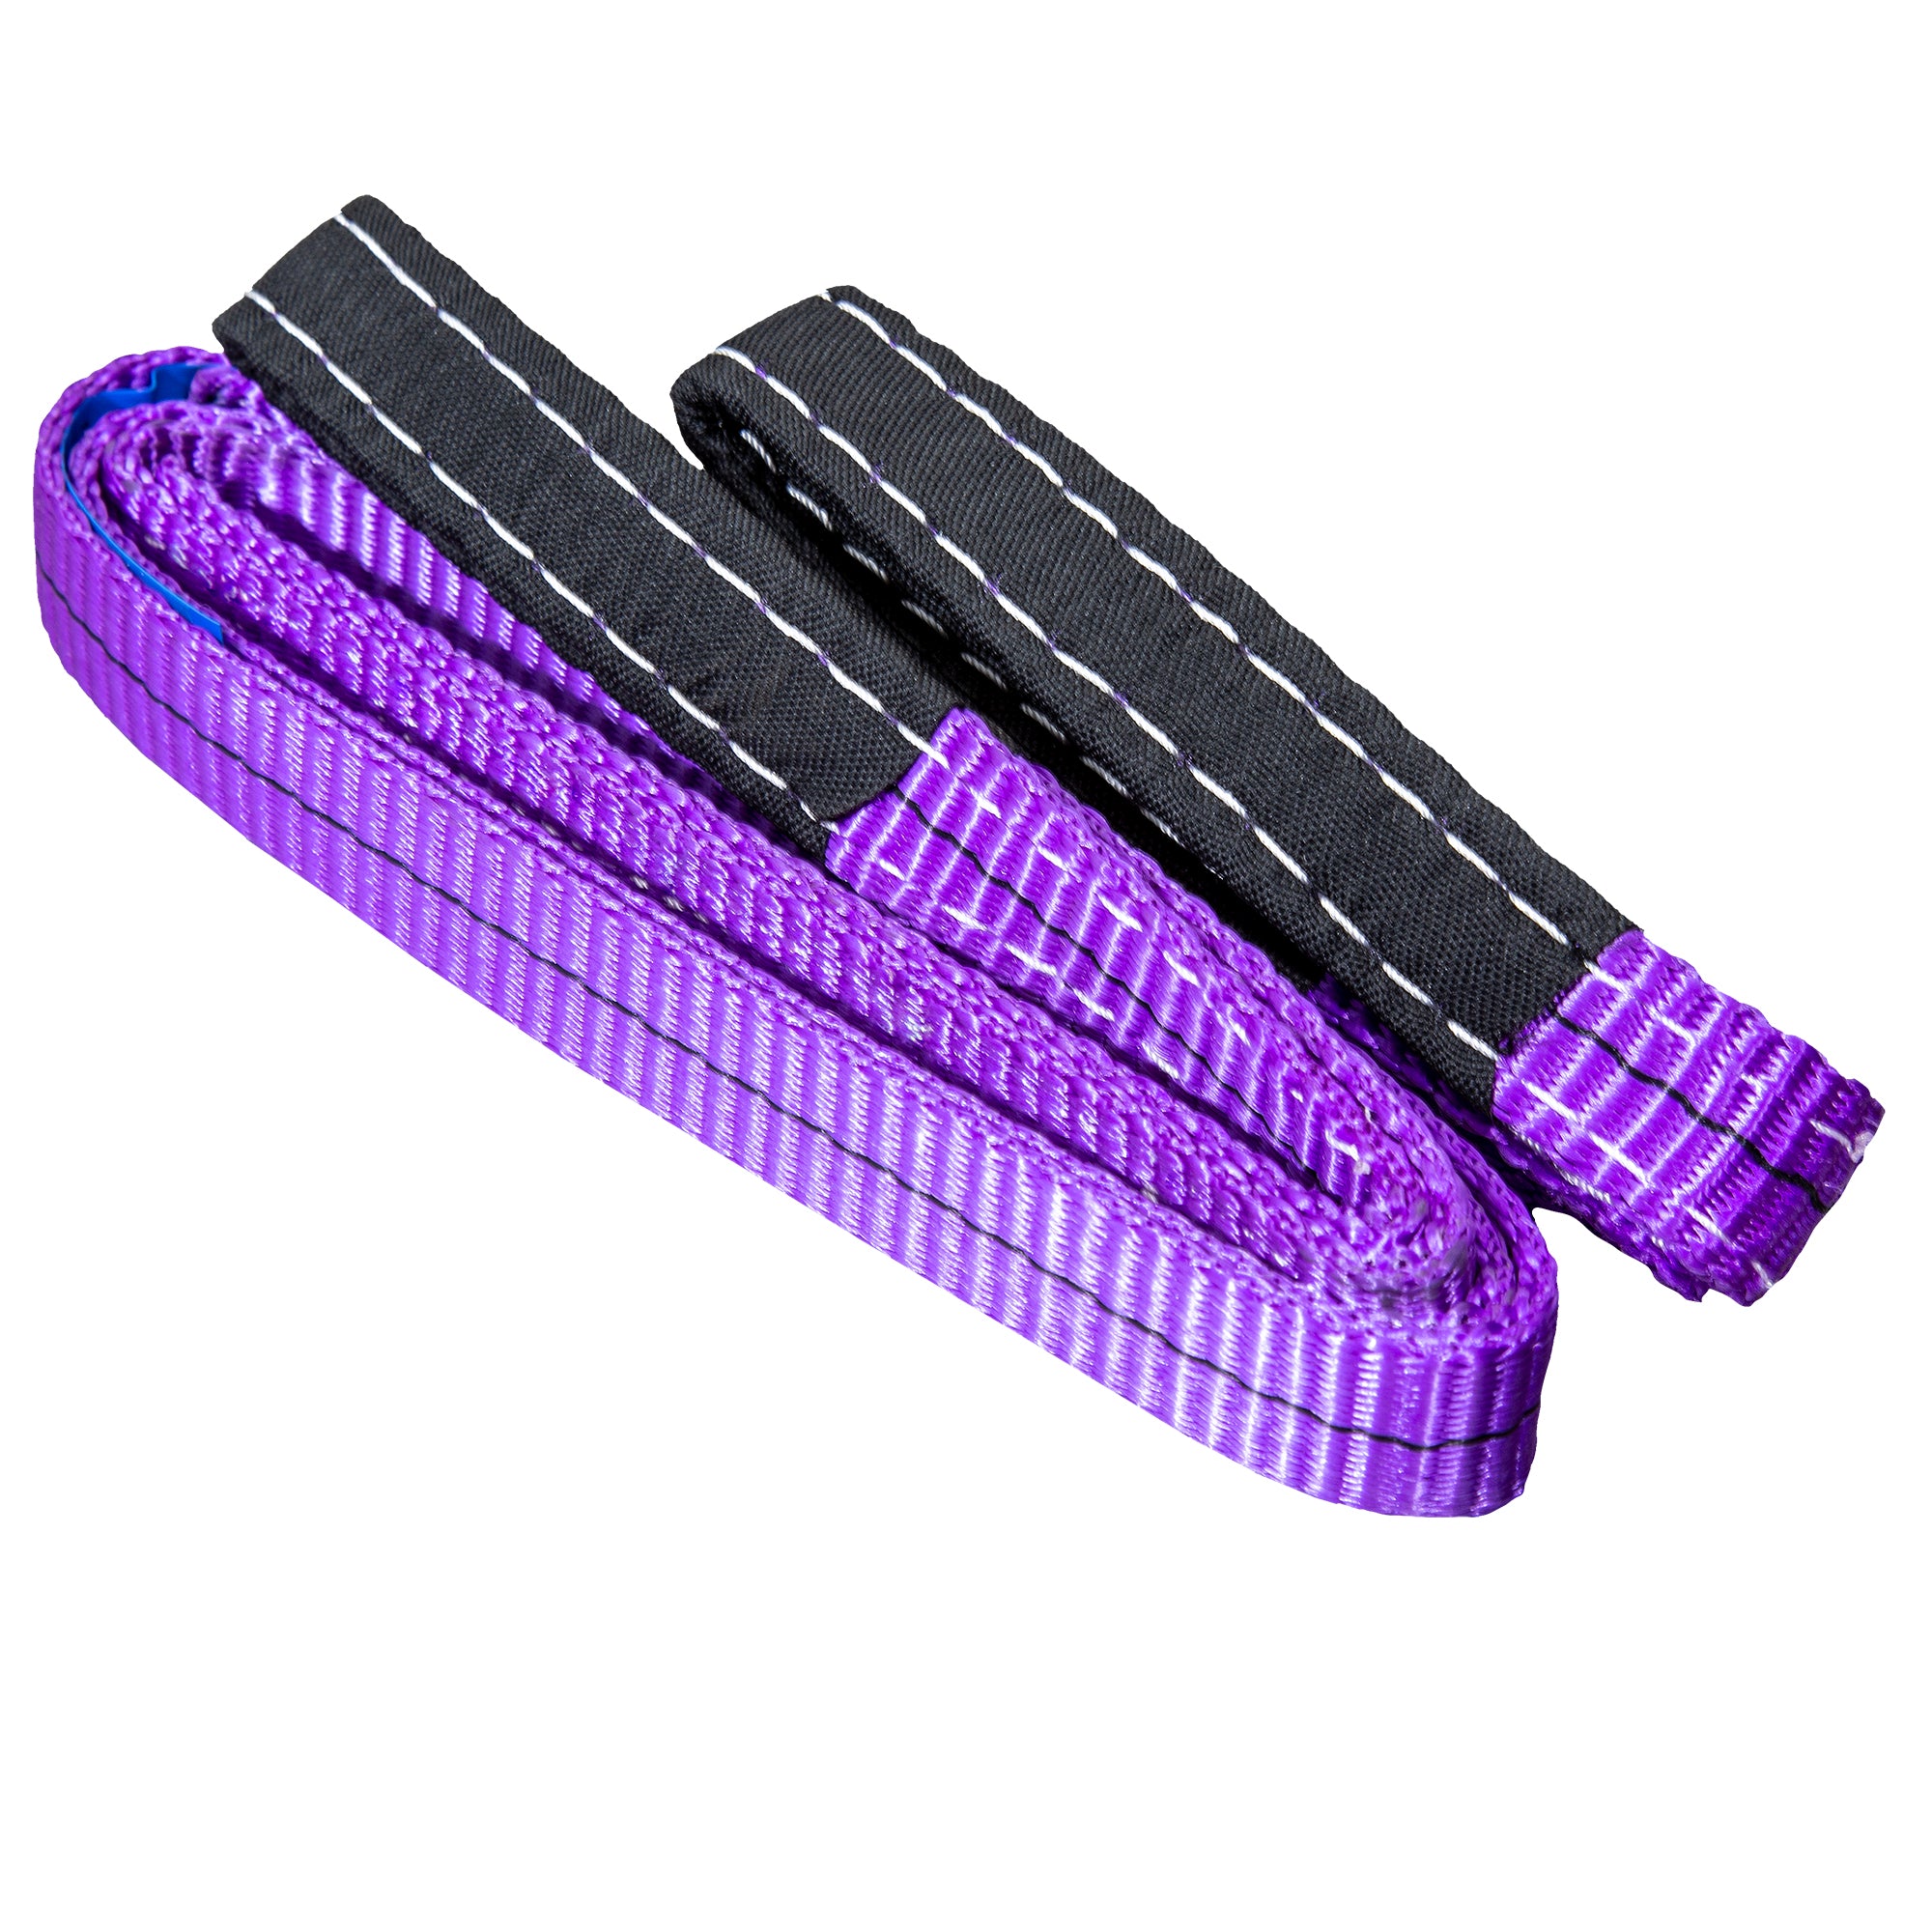 Leyso Purple 6' x 1" Multifunctional Heavy Duty Lift Sling Web Town Strap with 5" Diameter Reinforced Loops and Wear Guard End